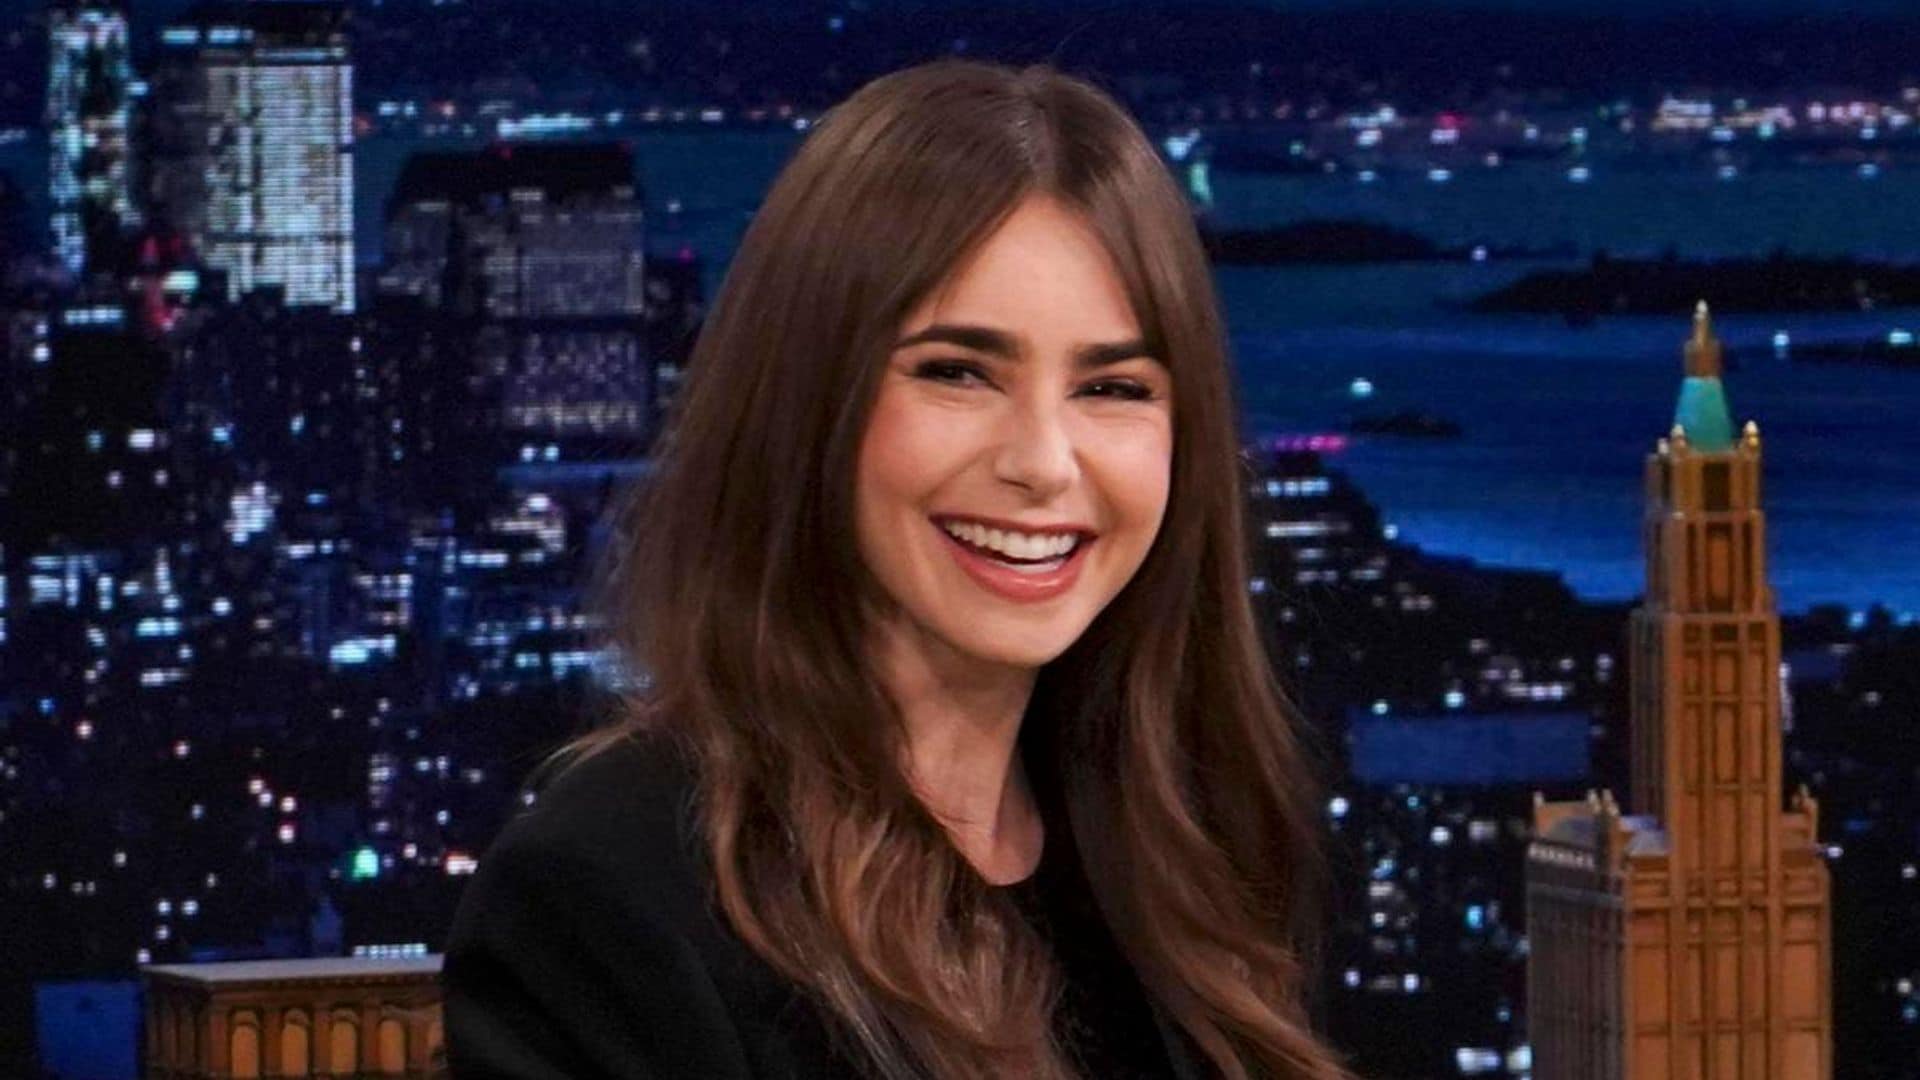 Lily Collins talks ‘Emily In Paris’ & how the shoot made her schedule weekly visits to the podiatrist